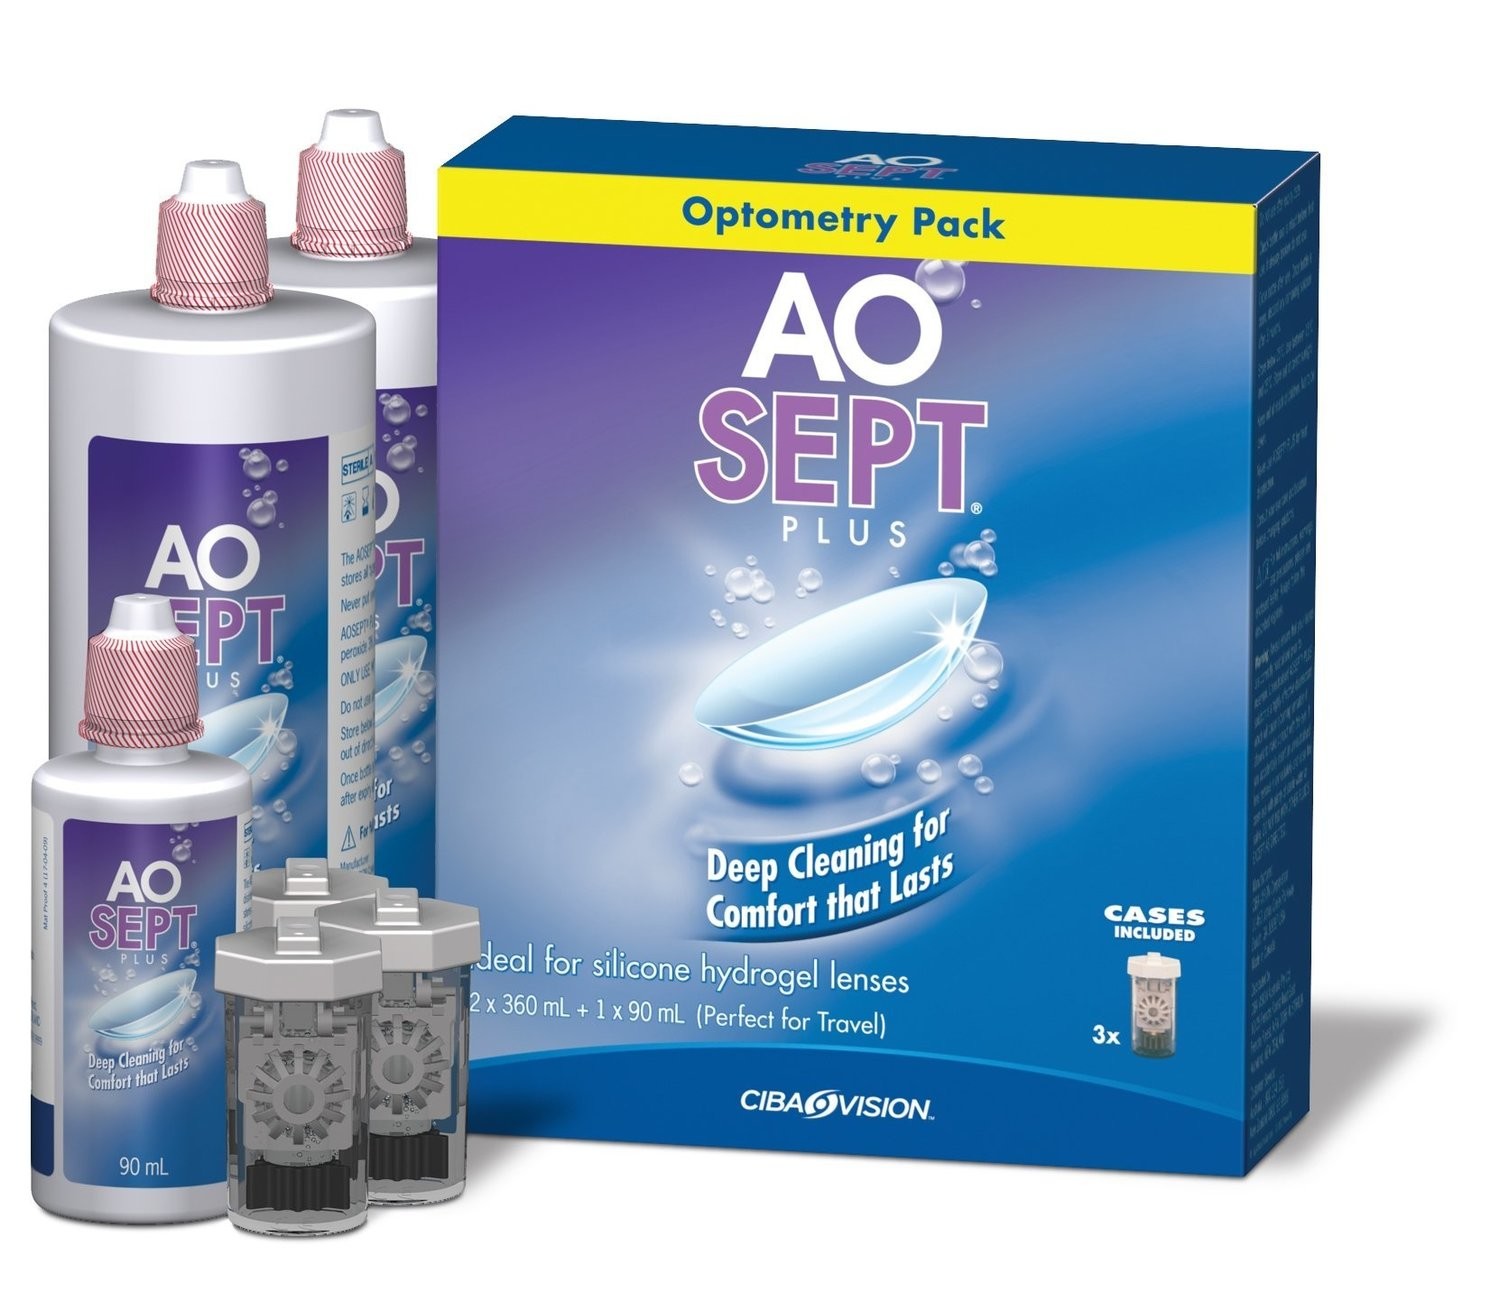 AOSept Plus Optometry only value pack by Alcon